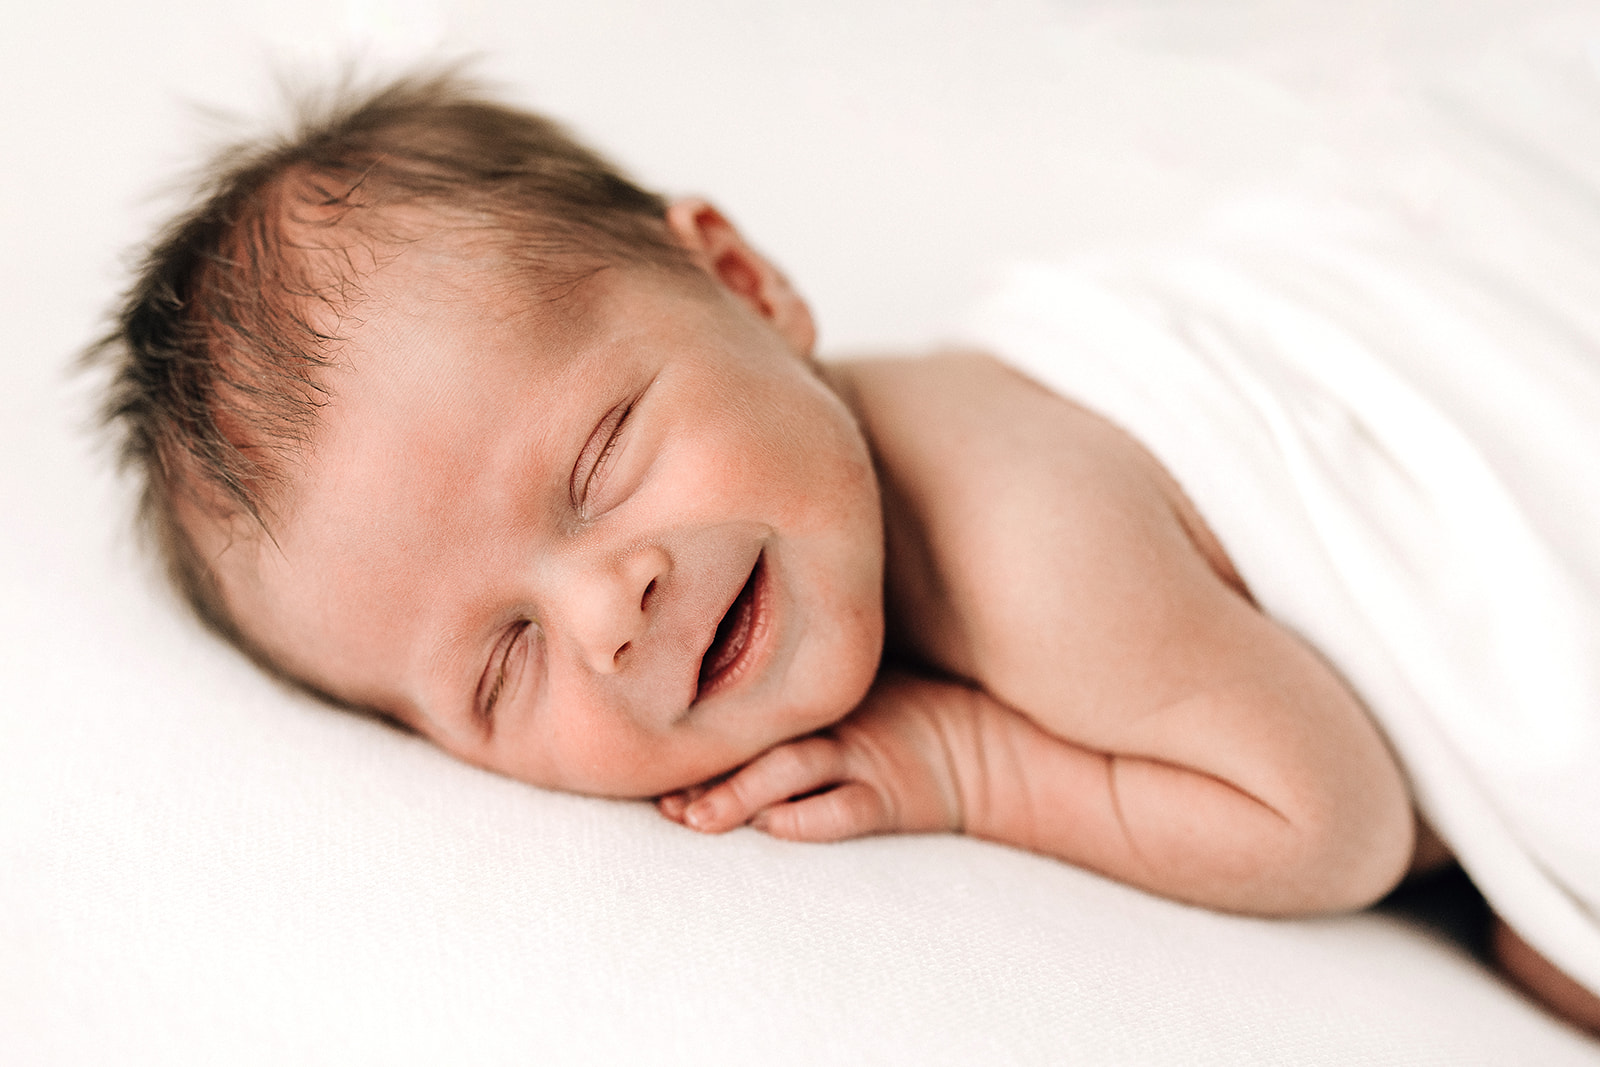 A newborn baby smiles in its sleep on a white bed with help from a lactation consultant St. Louis